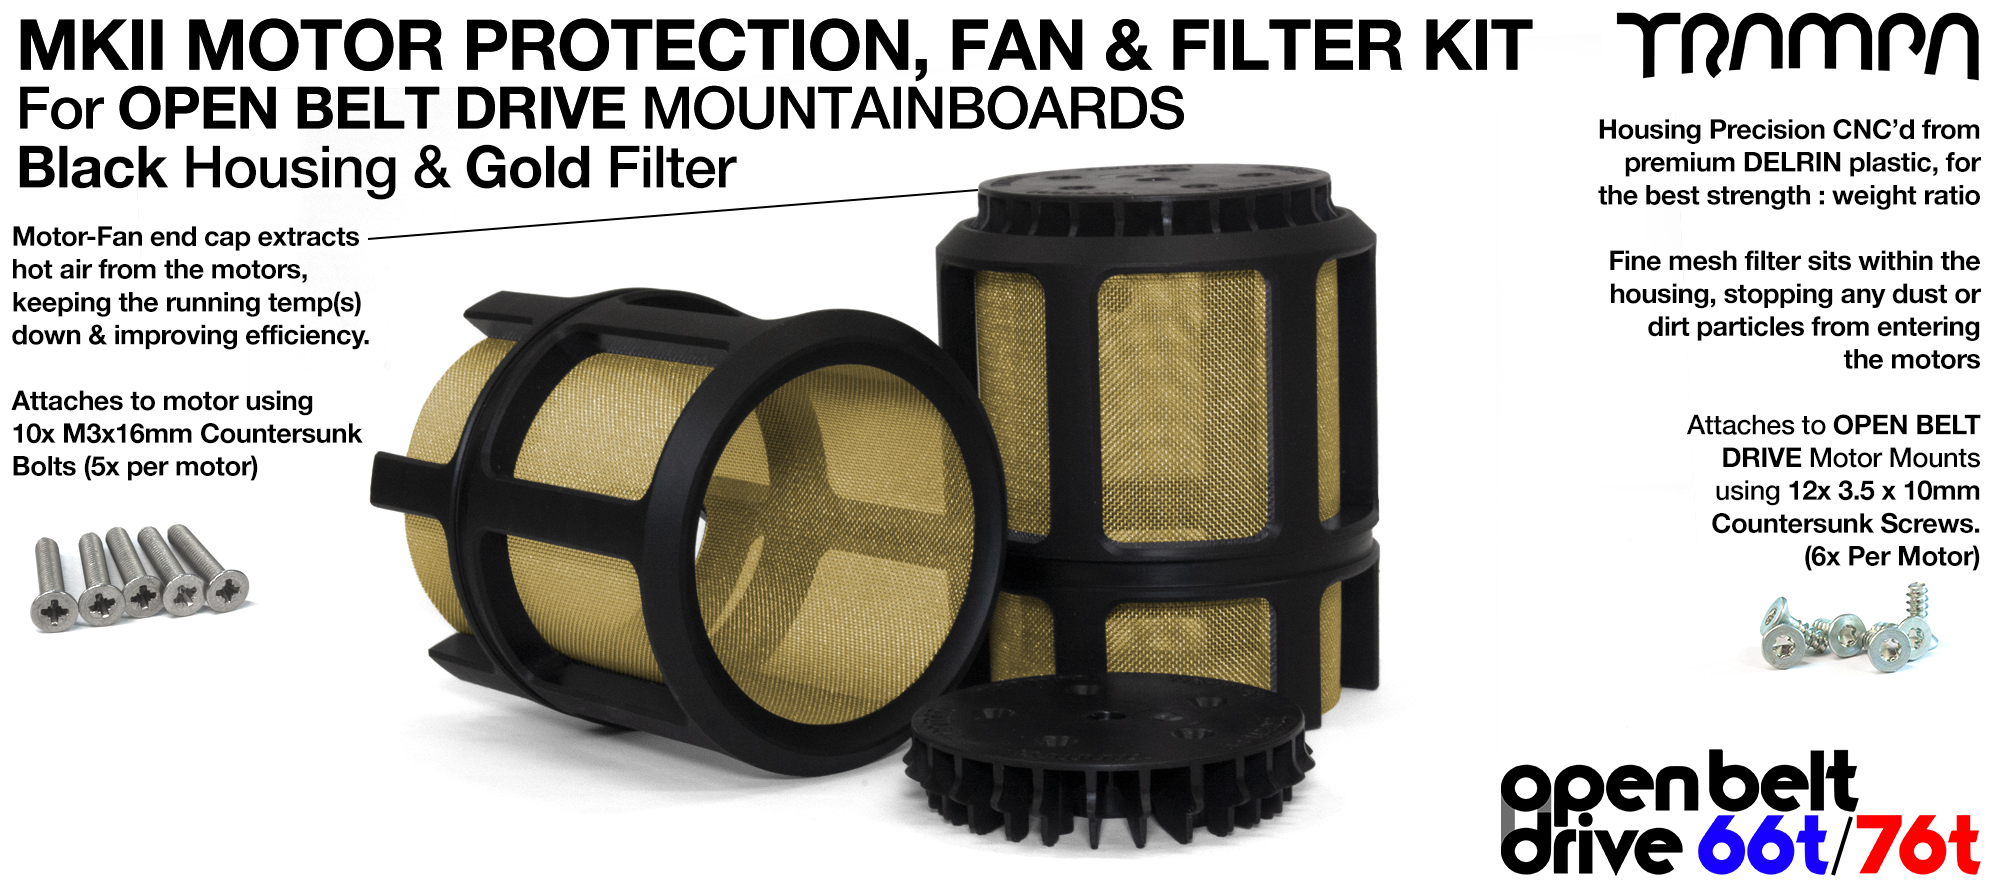 2x OBD MKII Motor protection Sleeve BLACK with GOLD Filter 